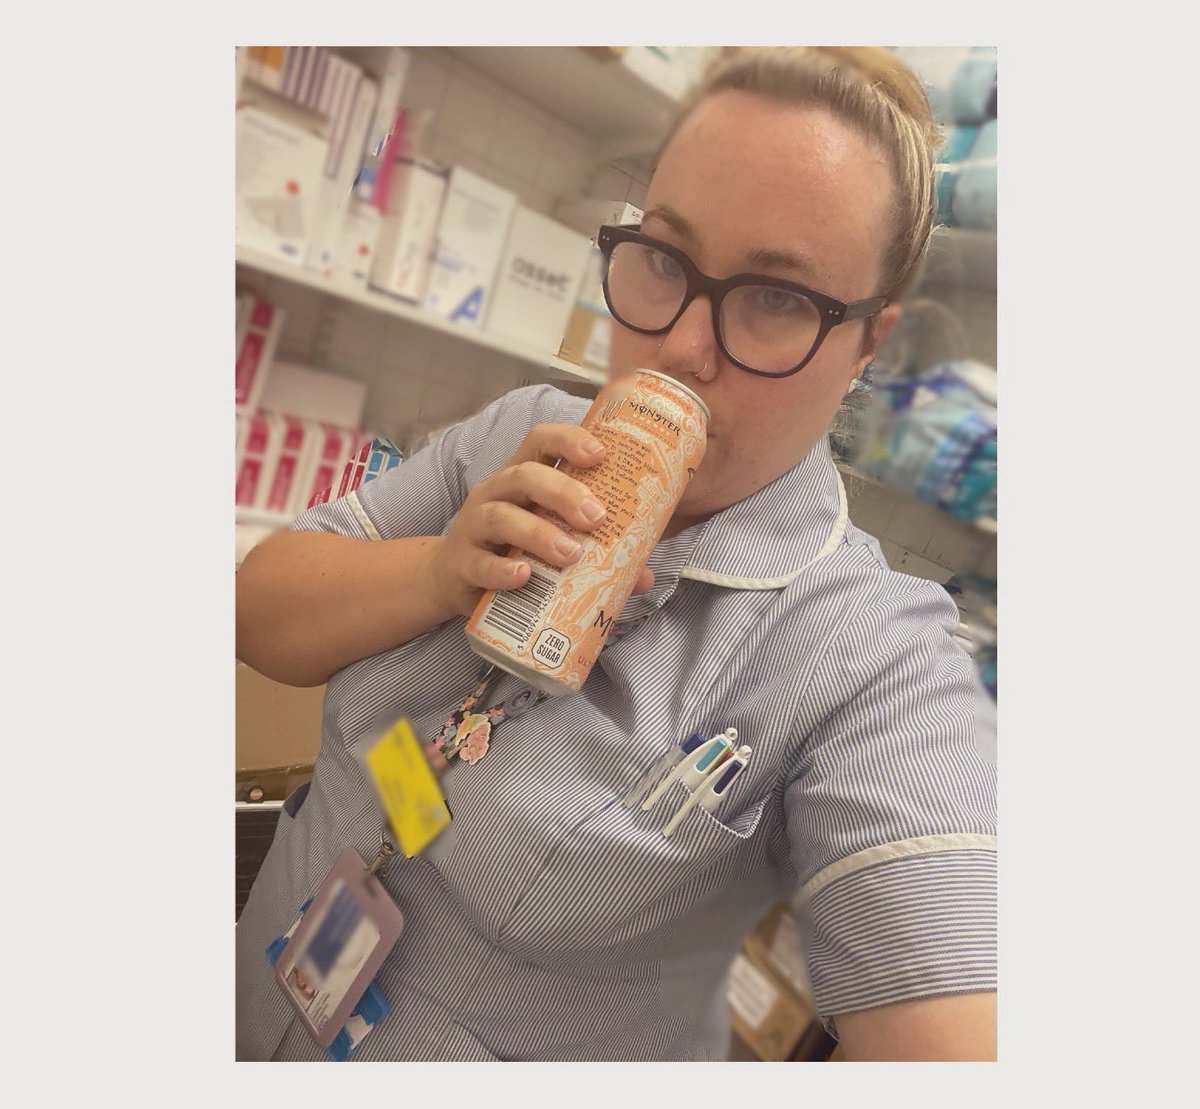 I’m so so tired. Been awake since 2pm. Role on night 3 of 3
I can honestly say I’m not a energy drink drinker. Till now 🥱 

#nightshift #nightnurse #registerednurse #nhs #hospital #nightshiftproblems #monster #energydrinks